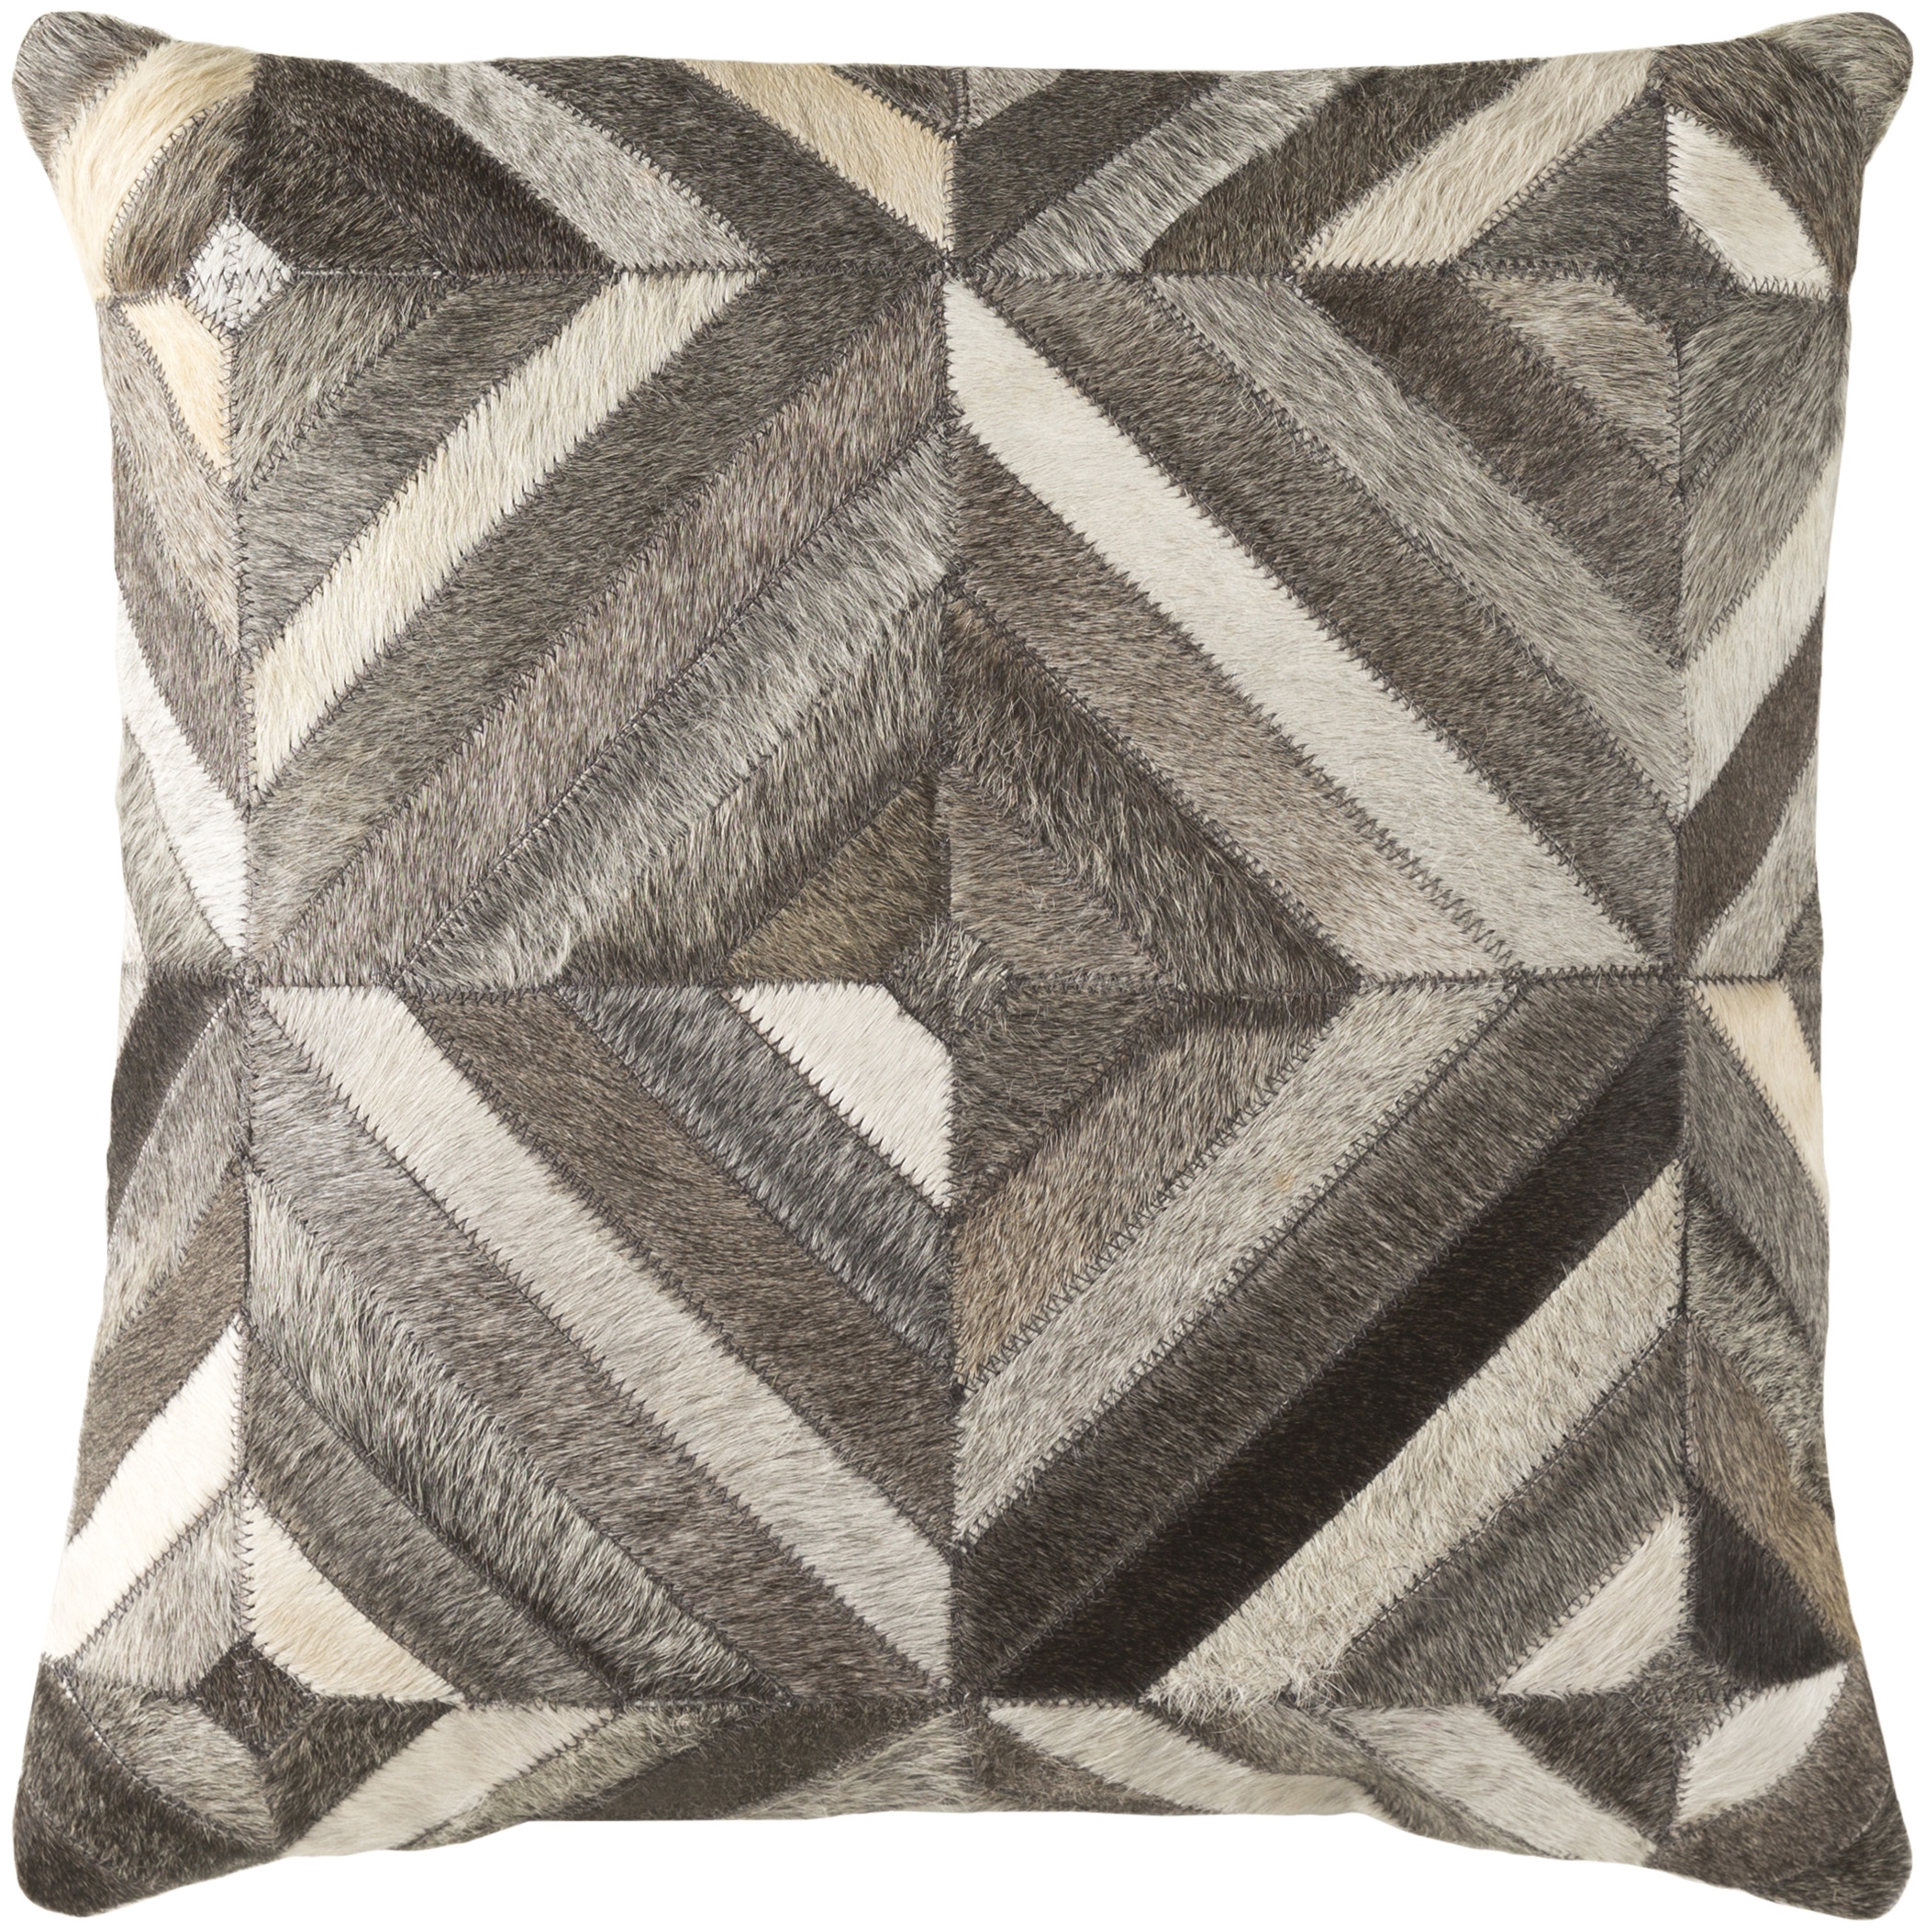 Lycaon Throw Pillow, 18" x 18", with down insert - Image 0